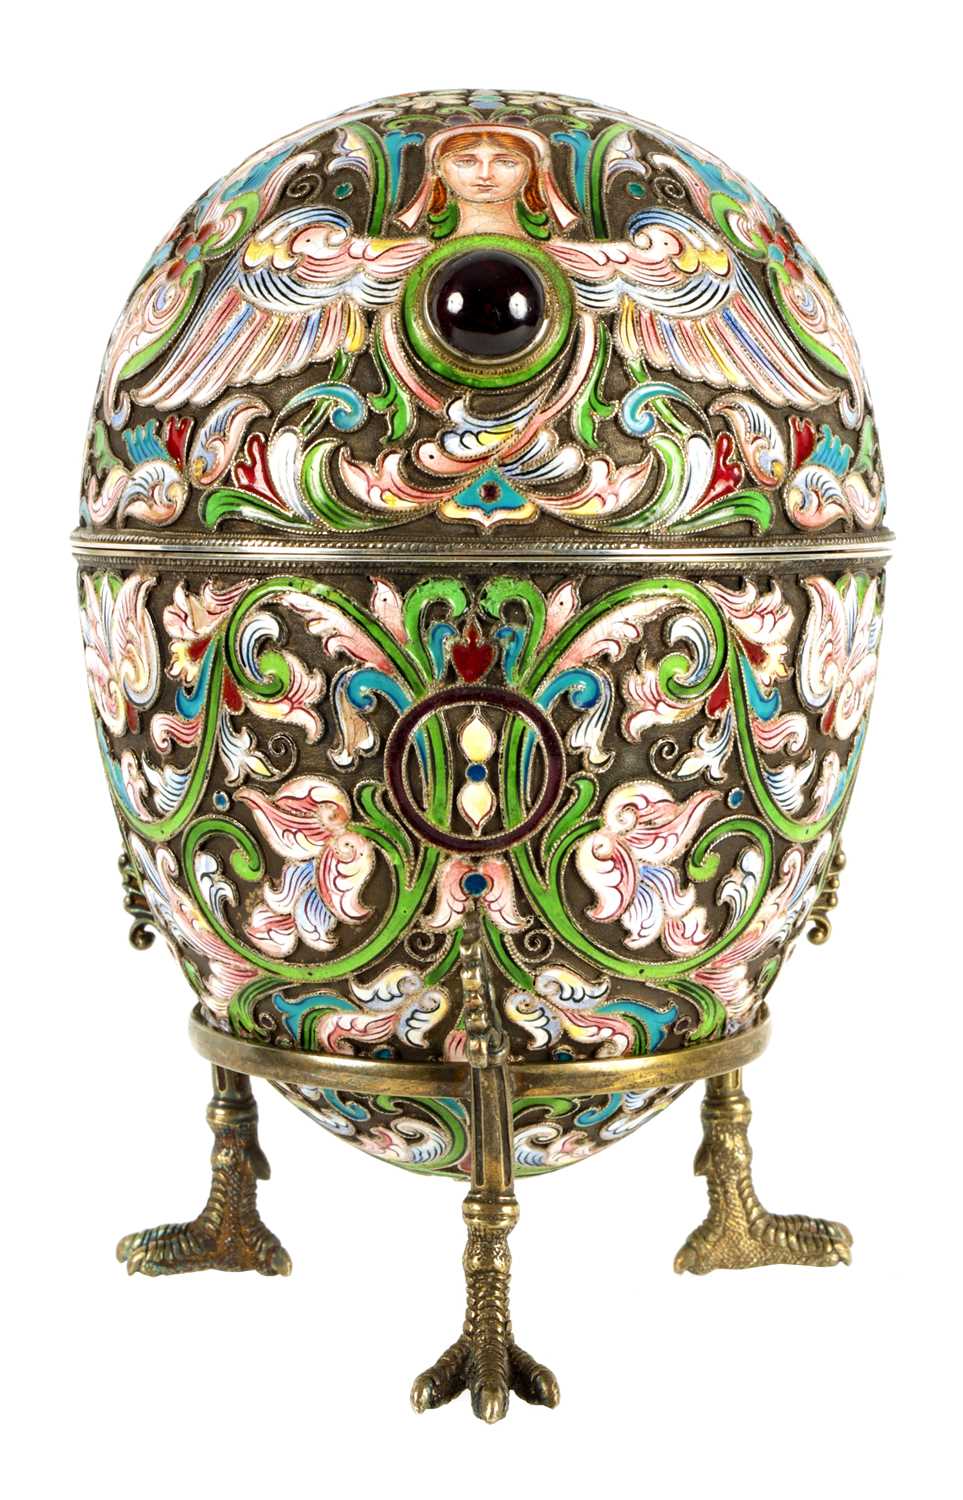 Lot 273 - A FINE EARLY 20TH CENTURY RUSSIAN RAISED ENAMEL WORK ON SILVER EGG WITH GILT INTERIOR